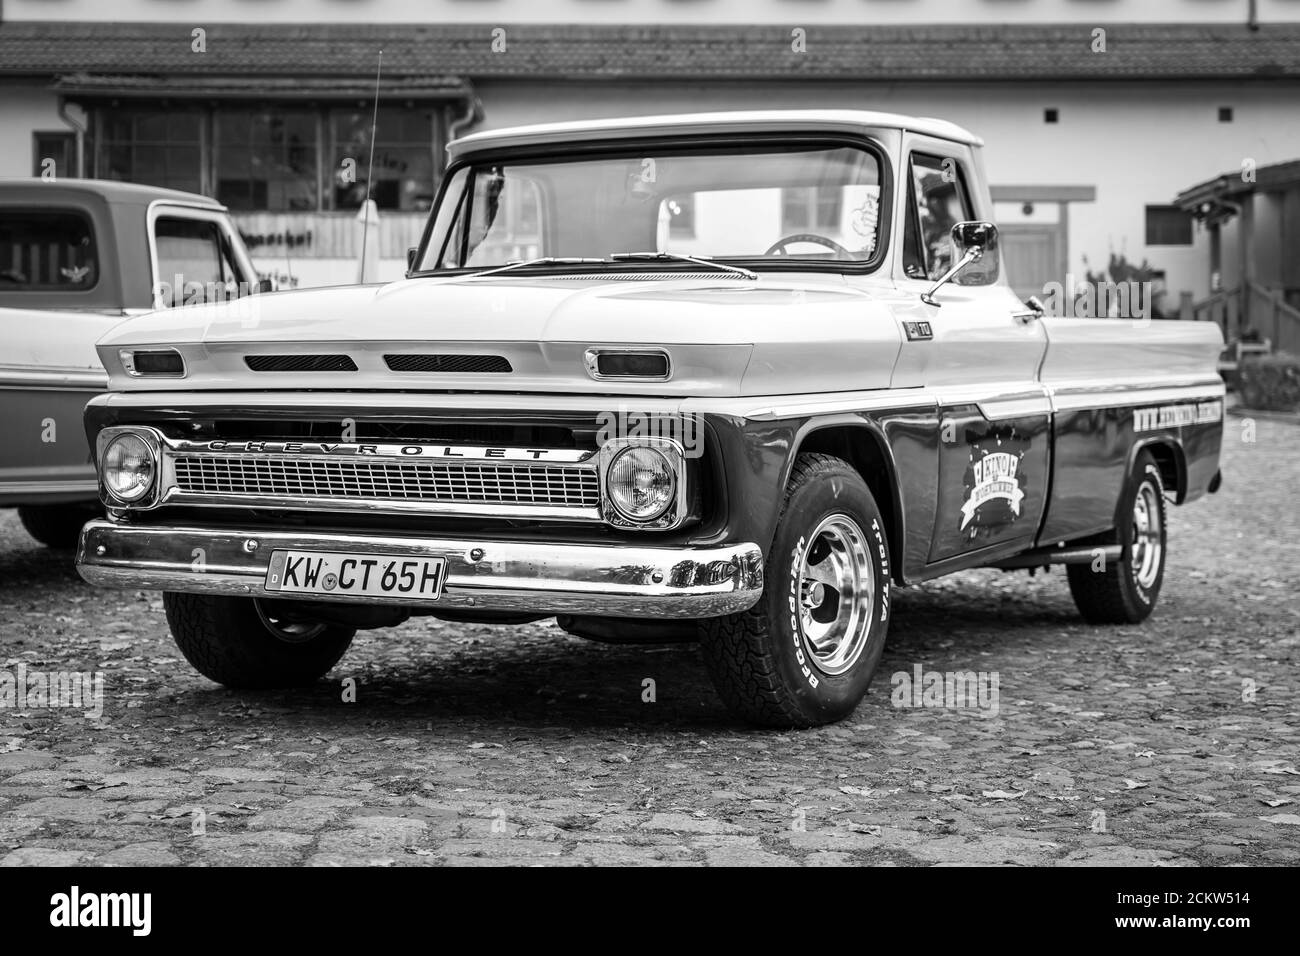 DIEDERSDORF, GERMANY - AUGUST 30, 2020: The full-size pickup truck Chevrolet C10, 1965. Black and white. The exhibition of 'US Car Classics'. Stock Photo